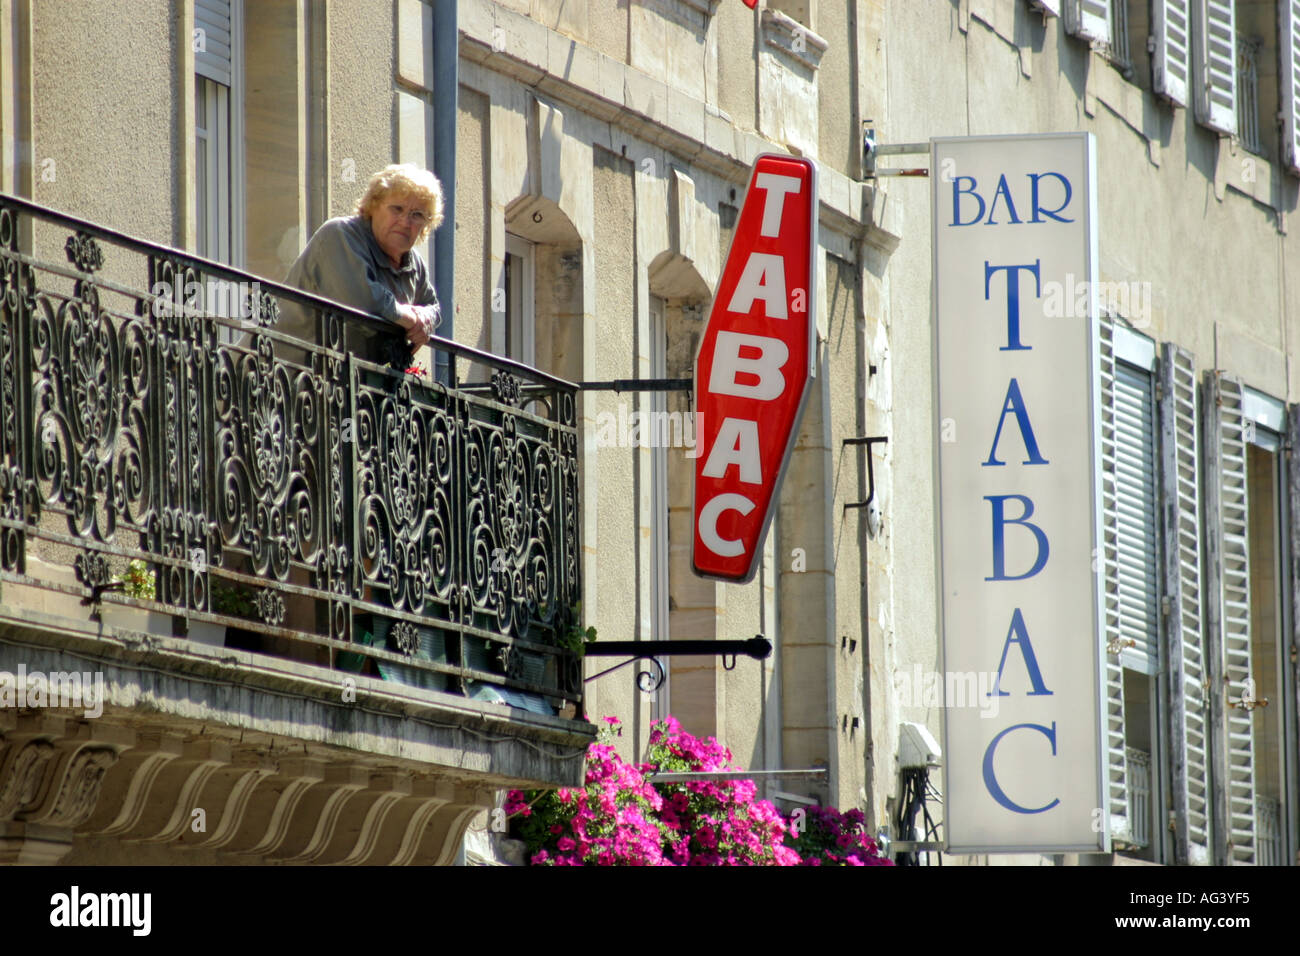 Old woman looking from balcony overlooking street in Bayeux Normandy France Stock Photo